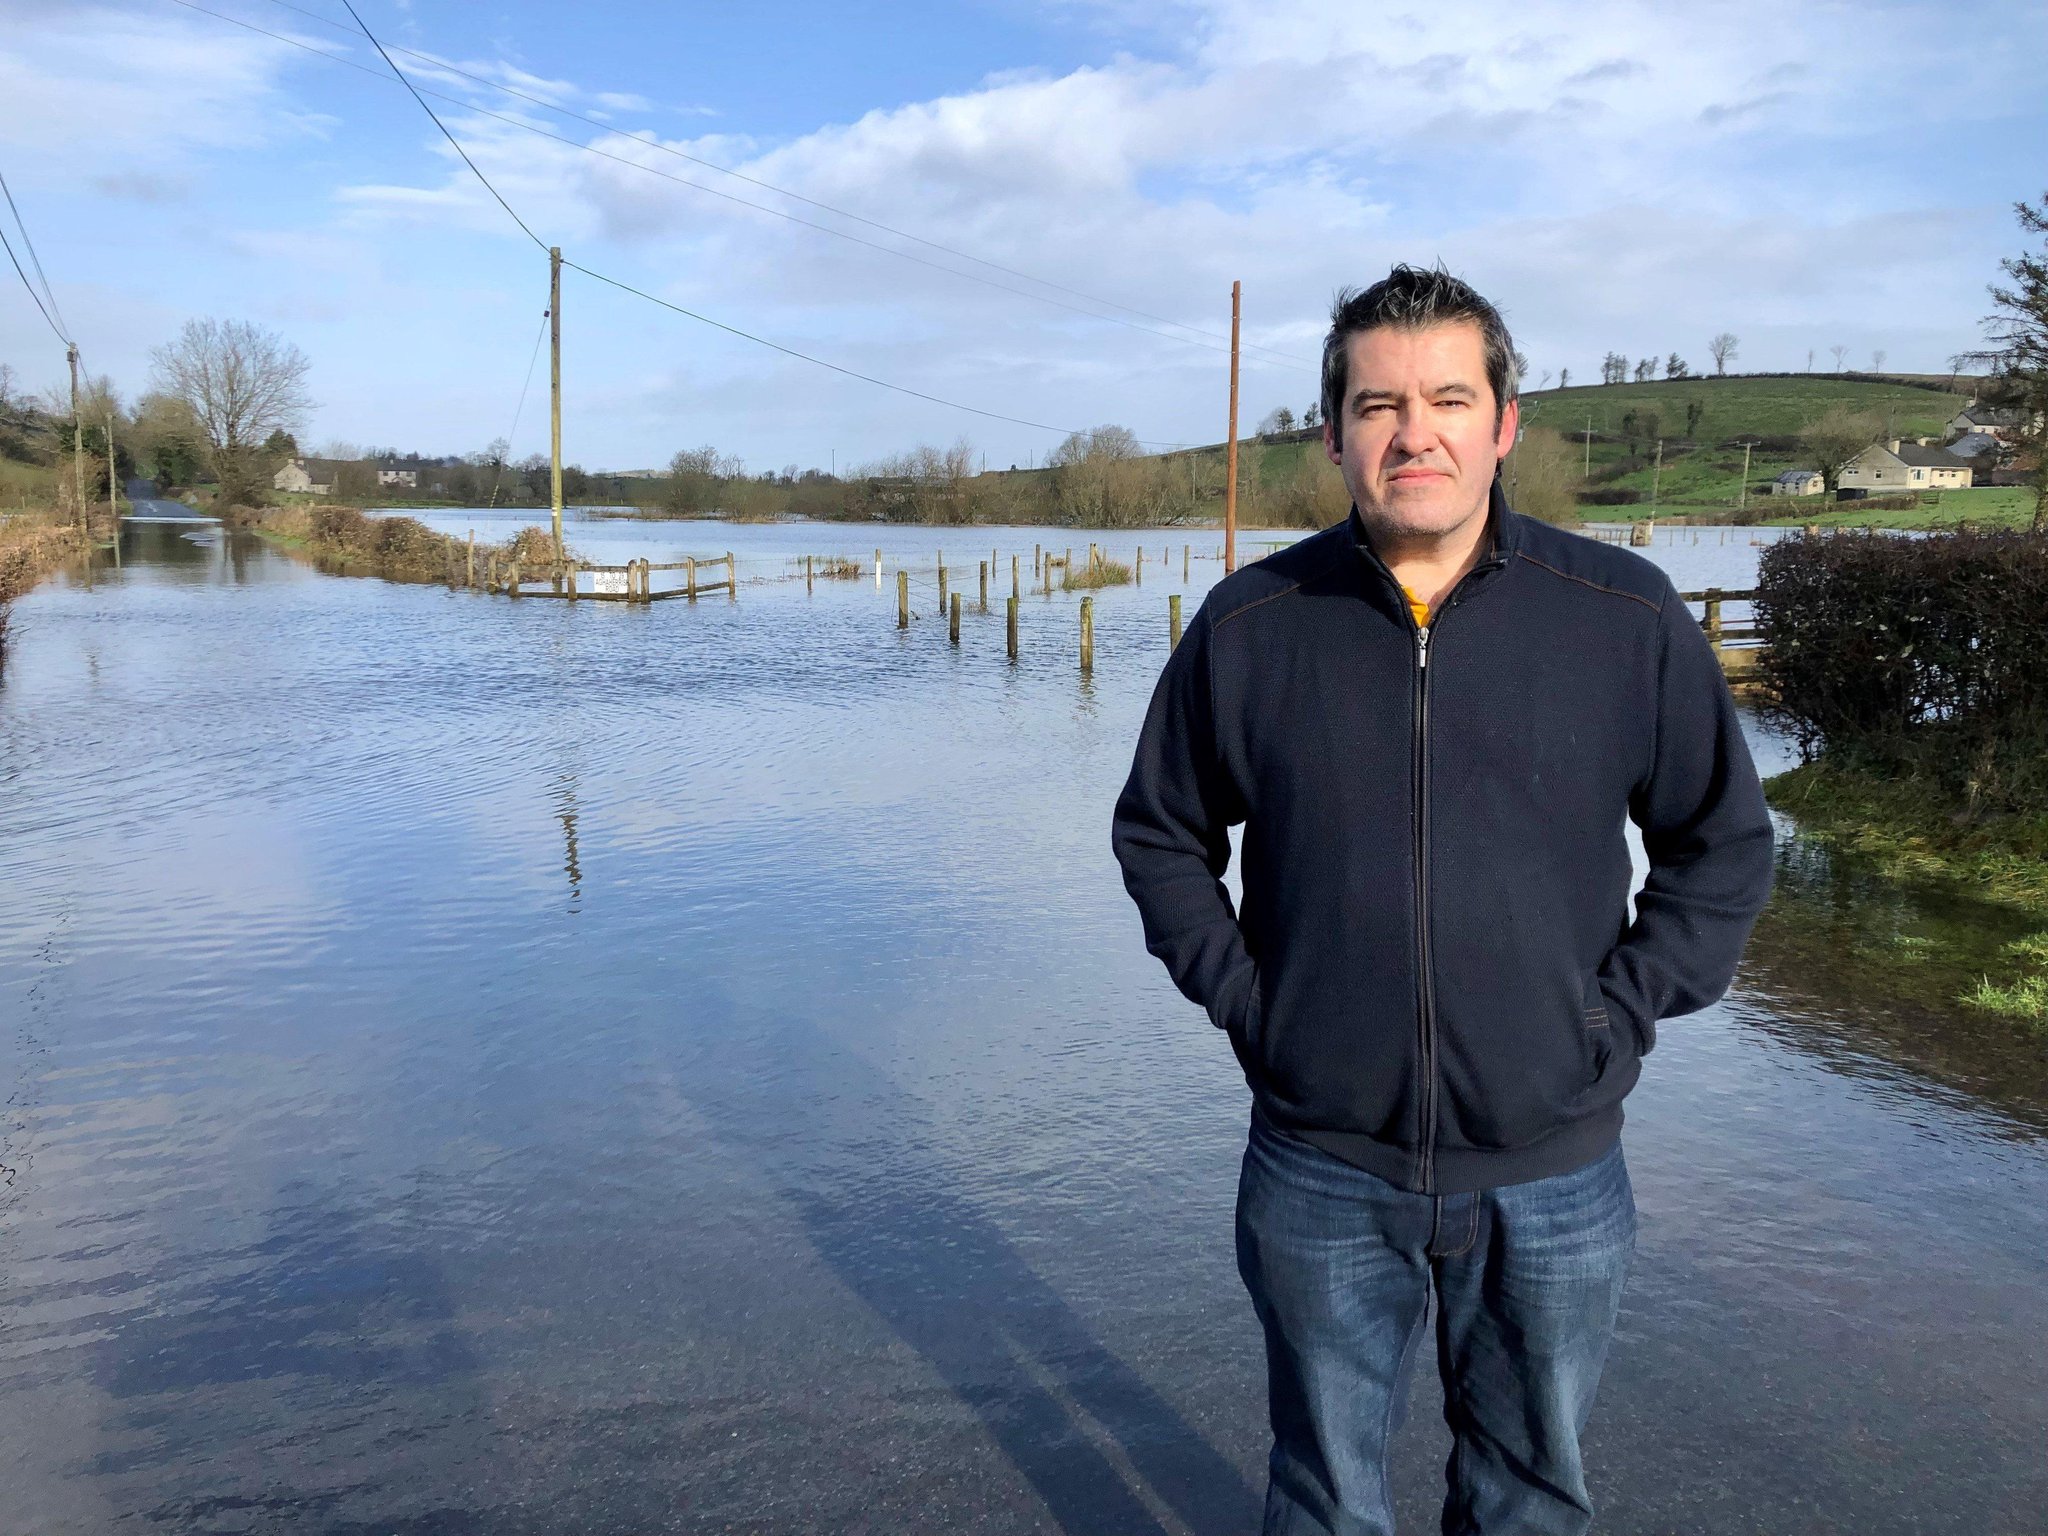 Residents in Co Fermanagh plead for help over repeated flooding